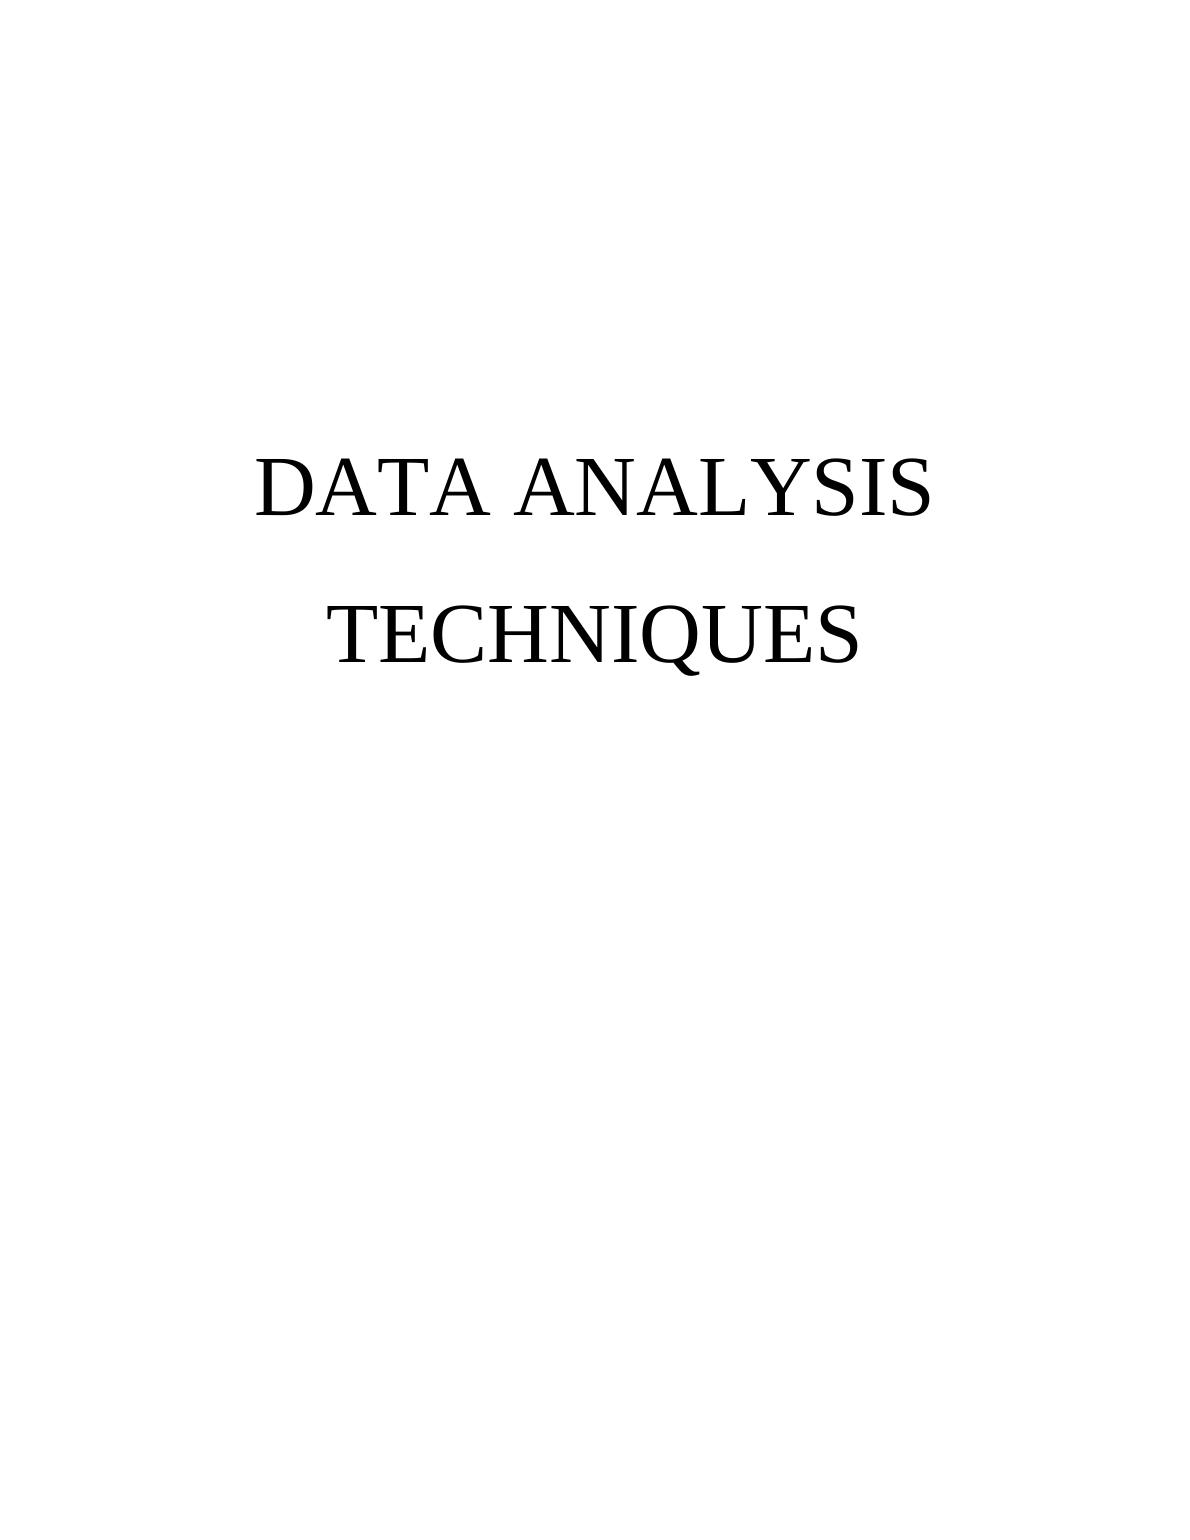 Data Analysis Techniques: Assignment_1